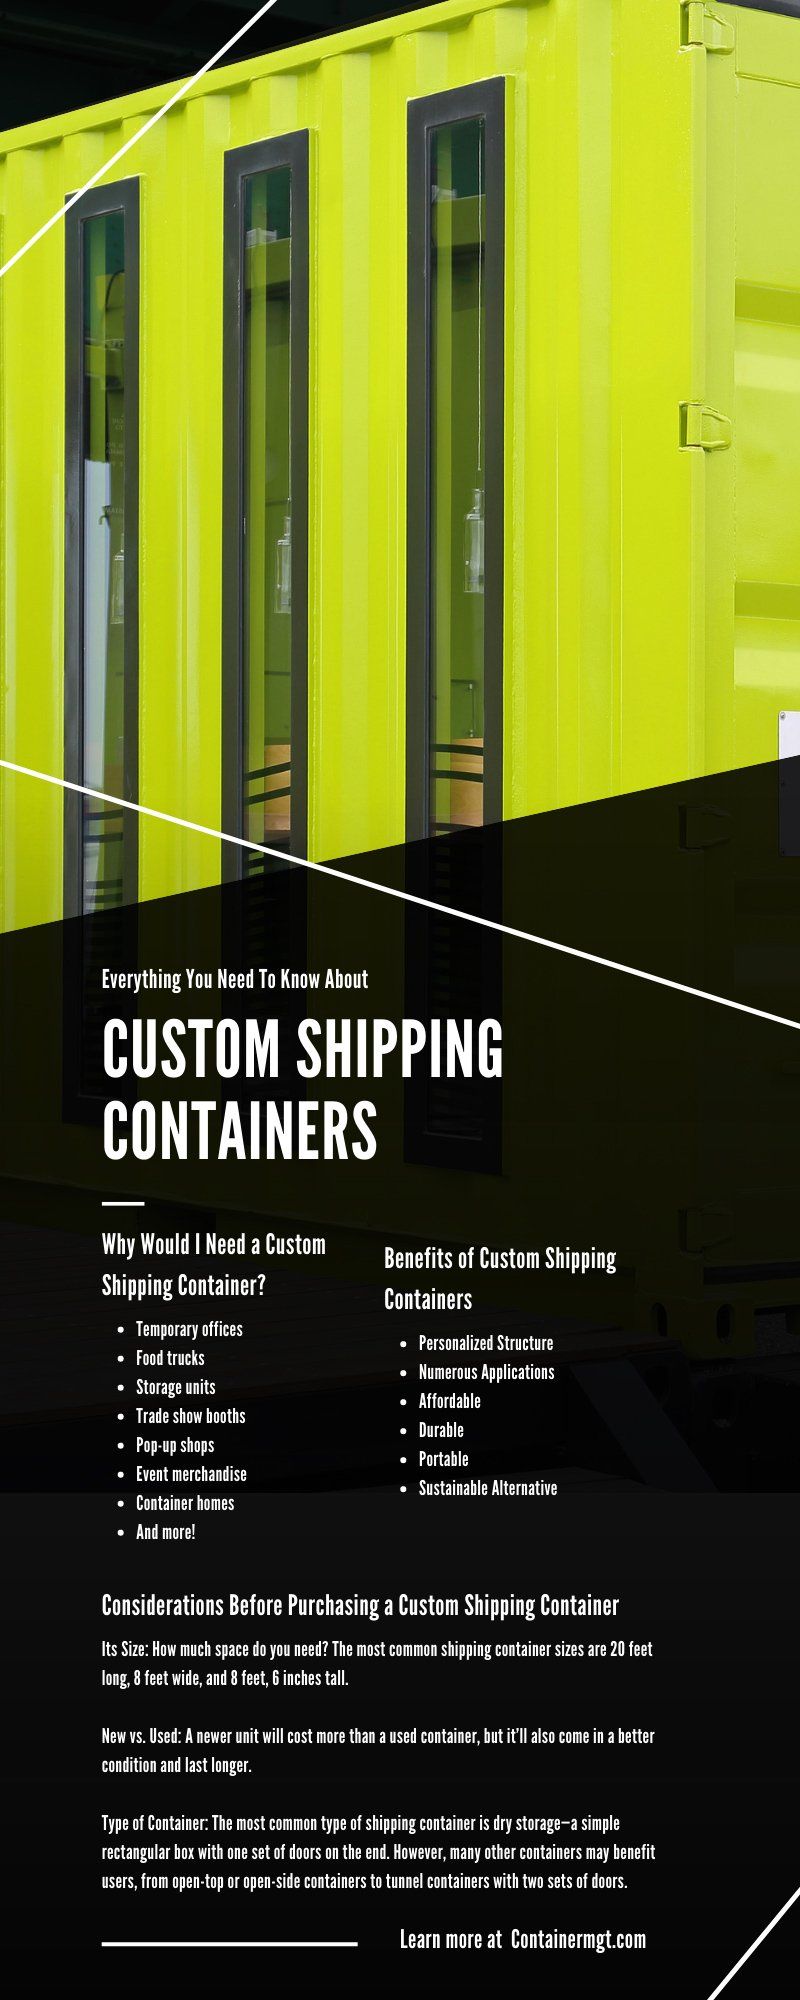 Everything You Need To Know About Custom Shipping Containers